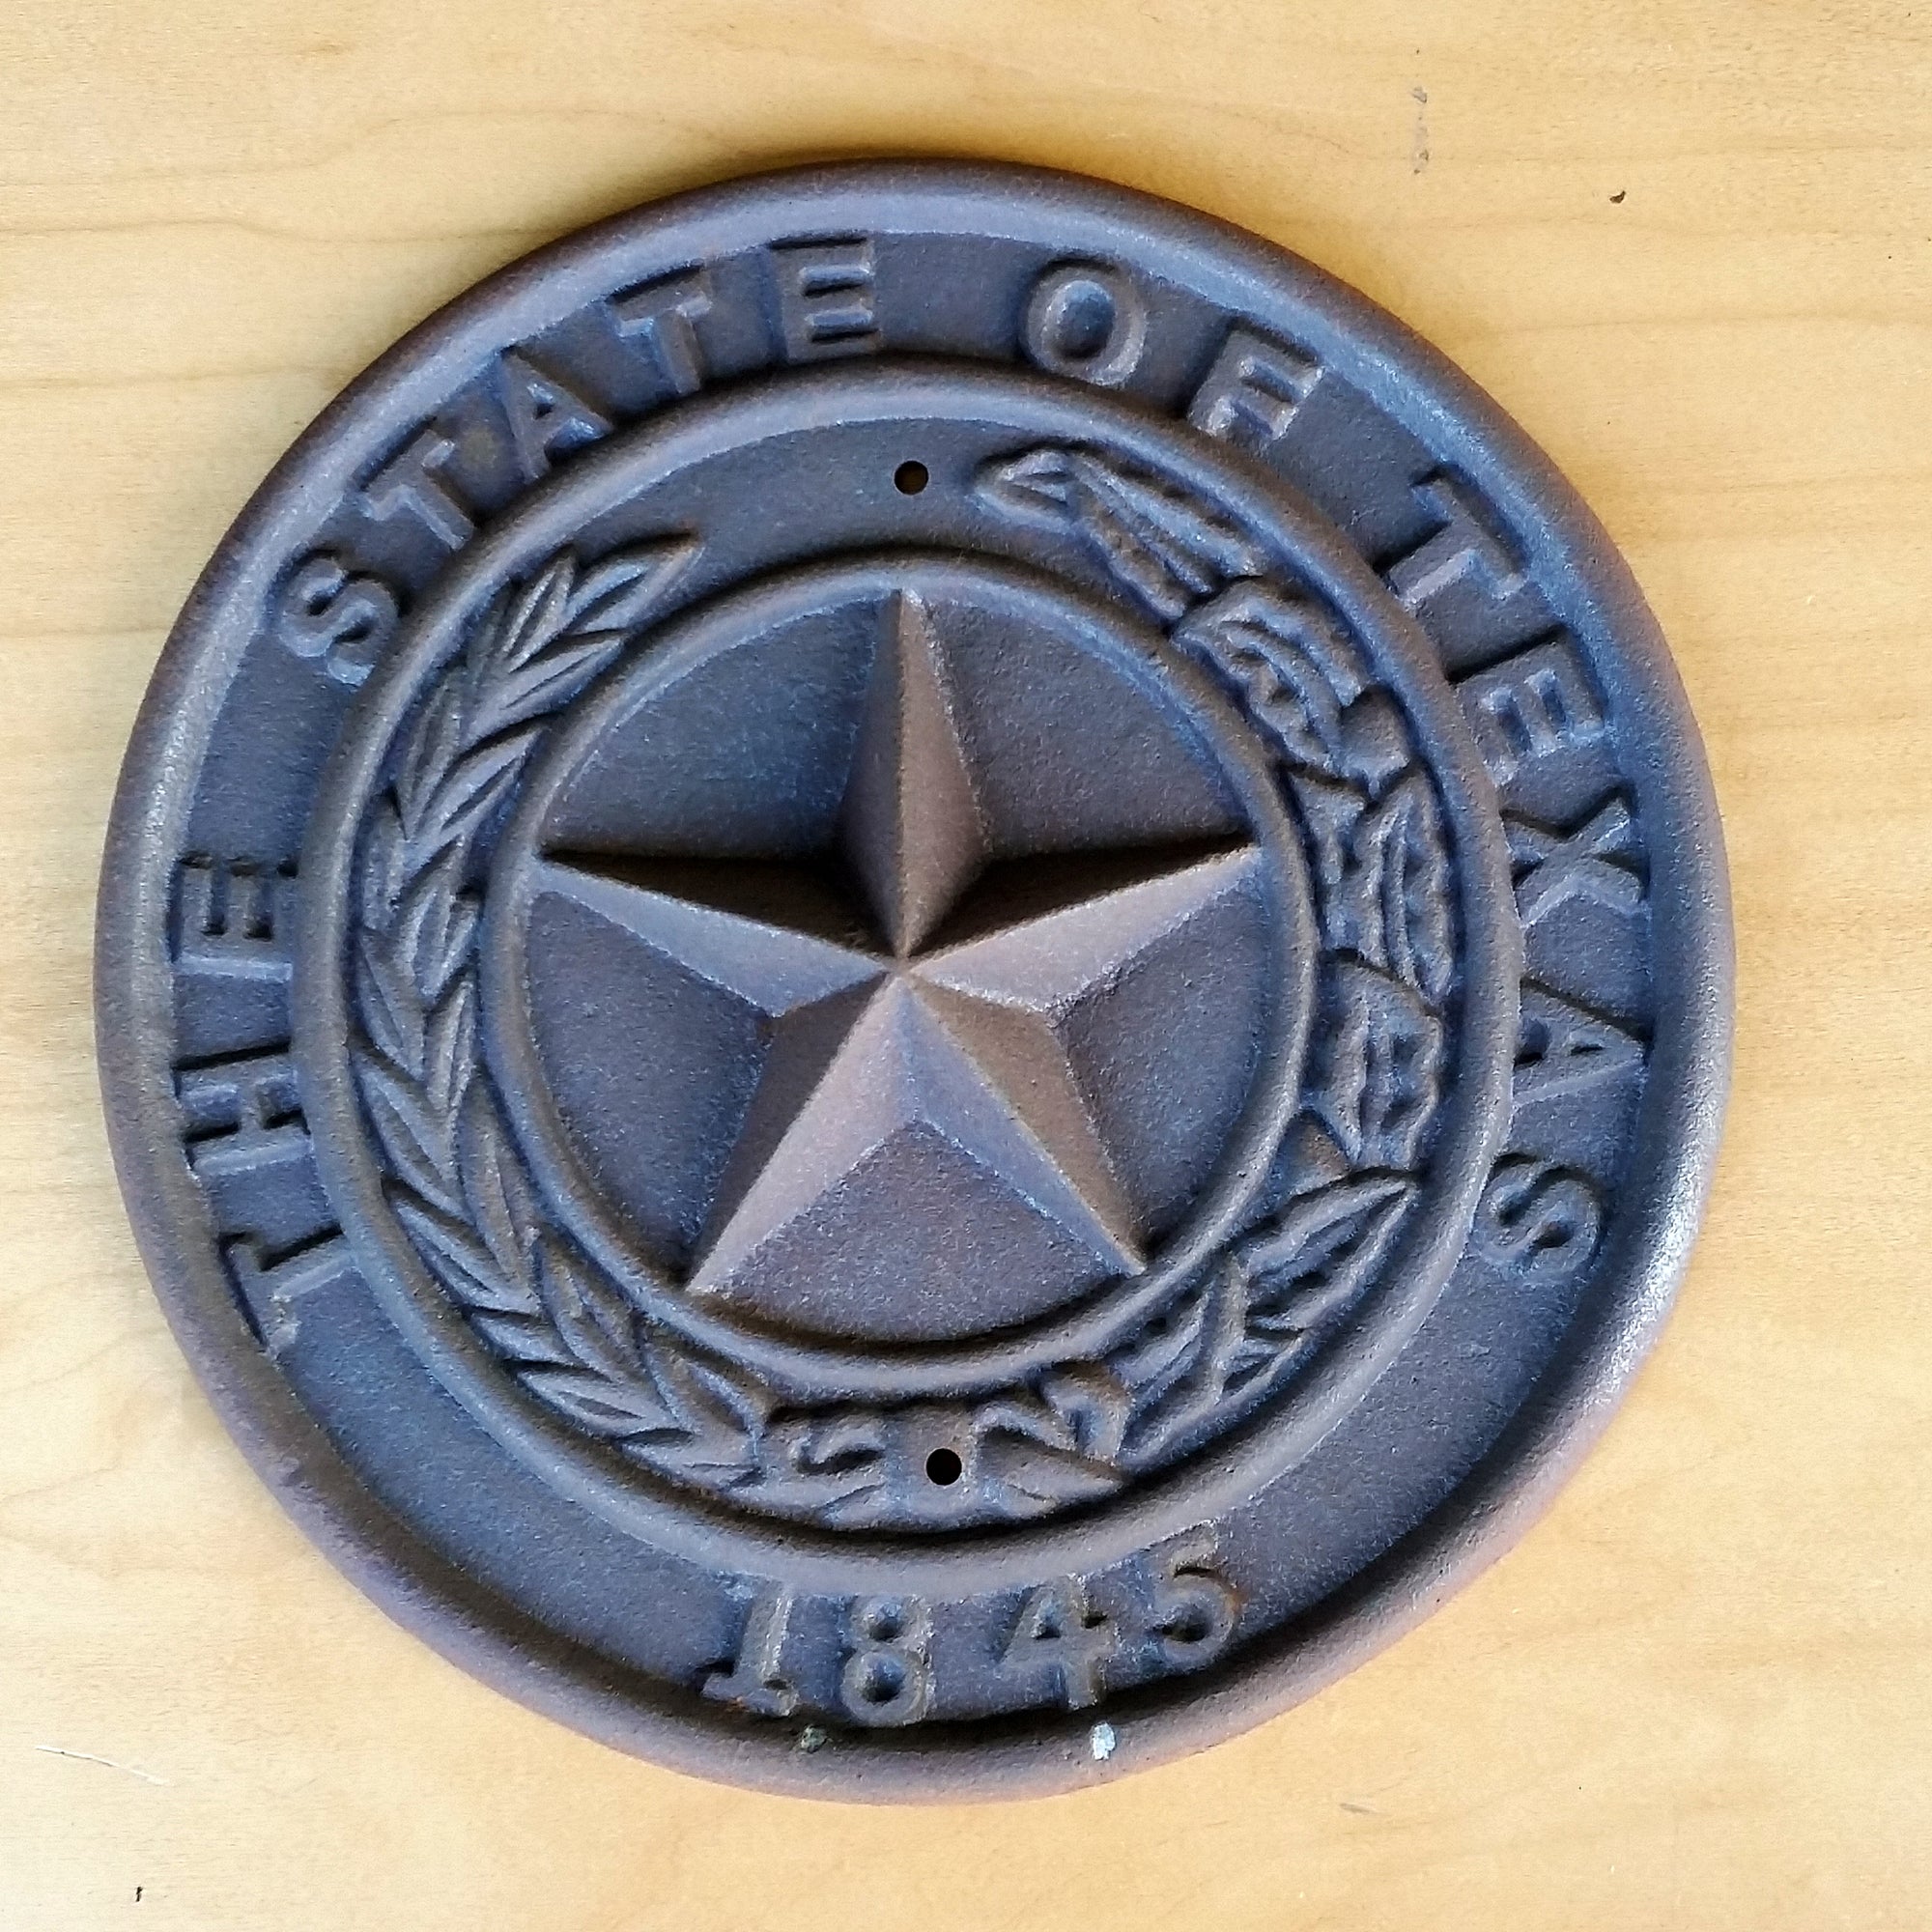 A Texas plaque made of metal, used as a decorative item, displayed on a white background.